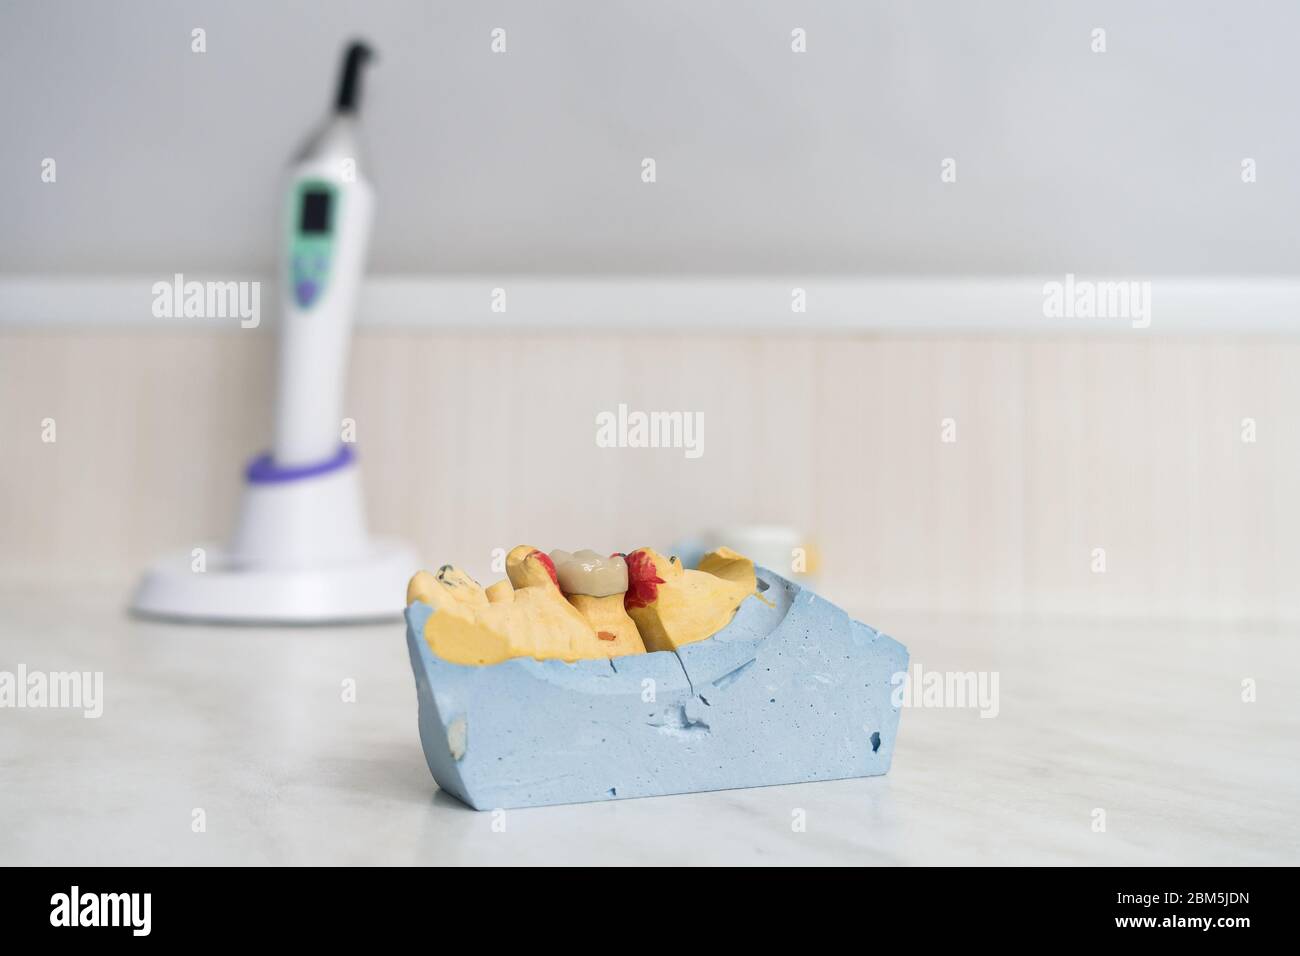 dental ceramic crown on a plaster model stands on a table Stock Photo